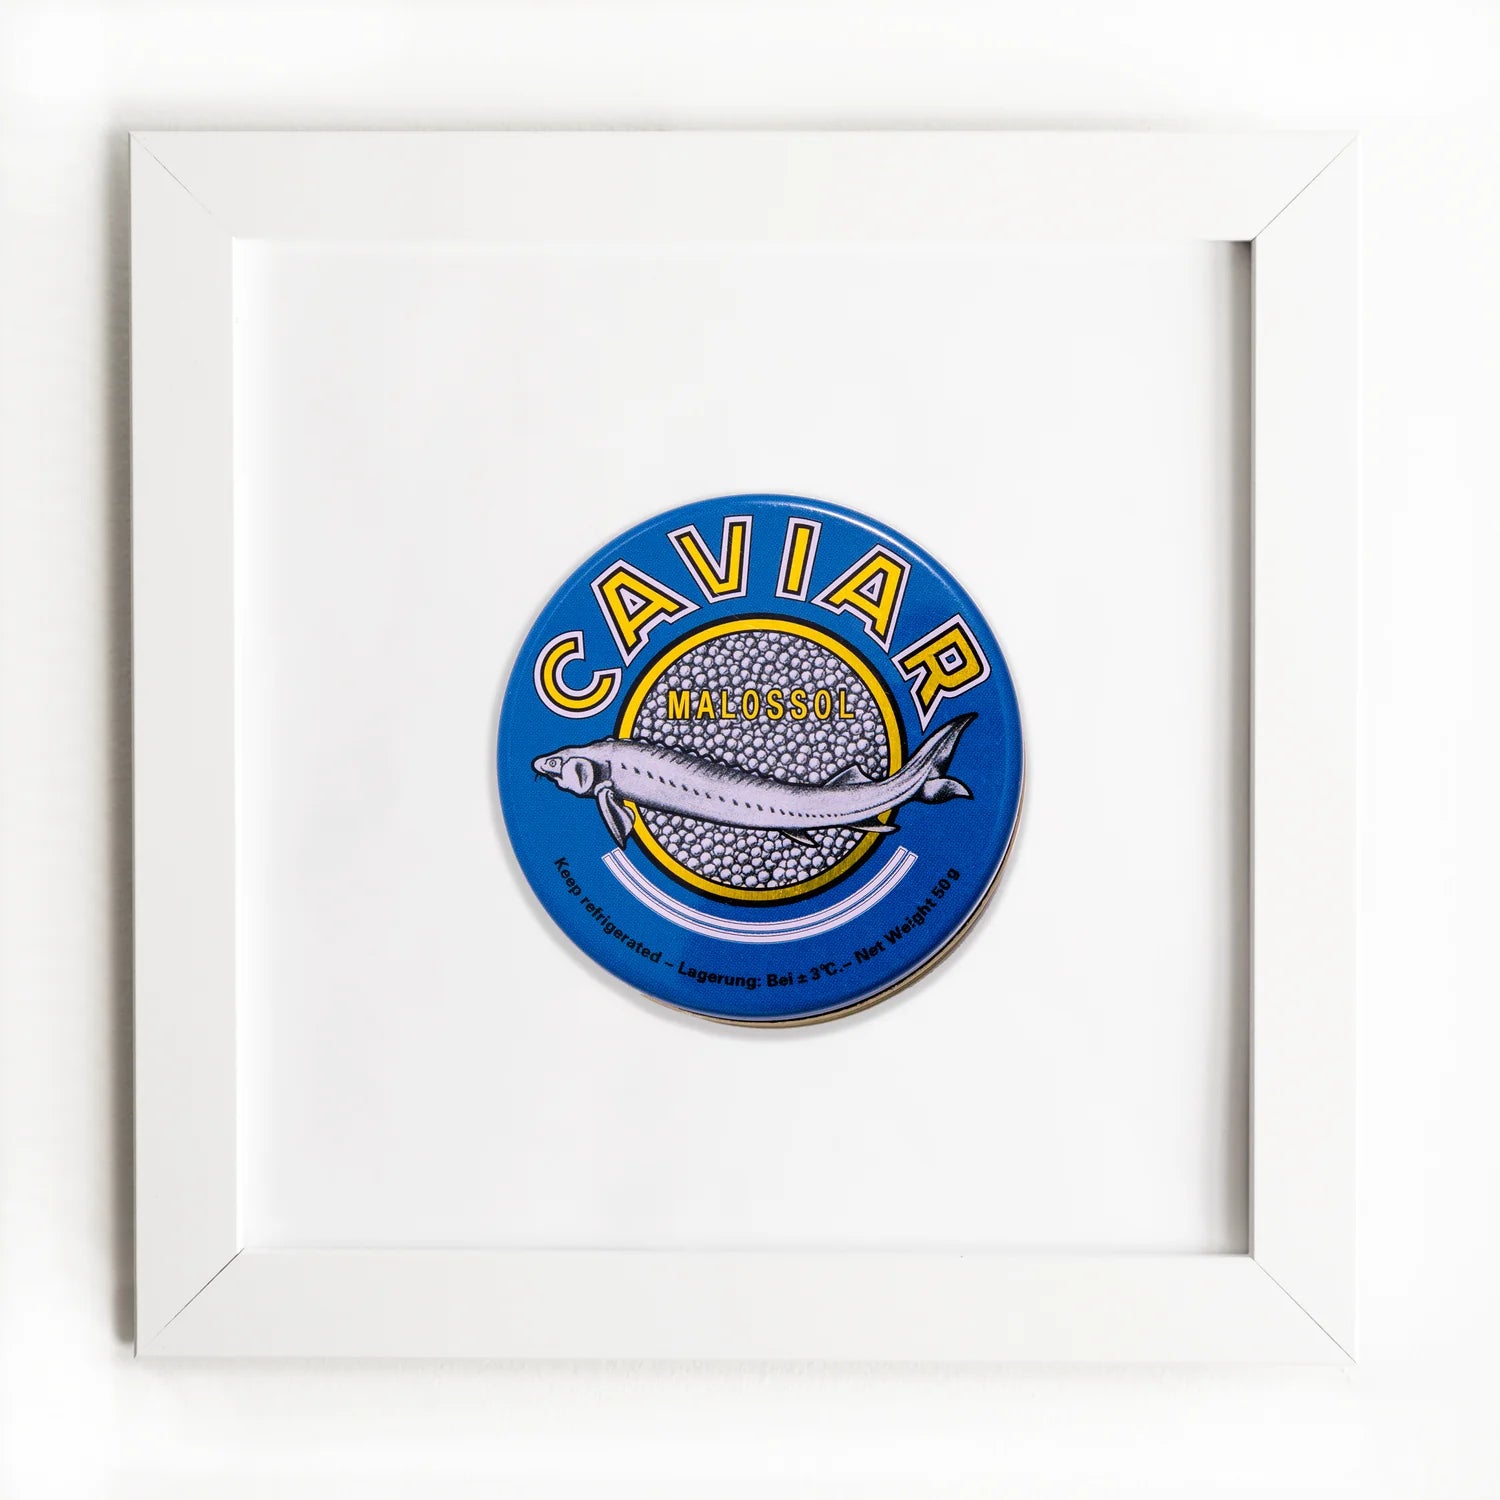 A framed graphic of a caviar tin label, featuring a blue and yellow design with an illustration of a sturgeon and the text &quot;Caviar Malossol&quot; on it, displayed against a white Match South Art Square White Frame background.